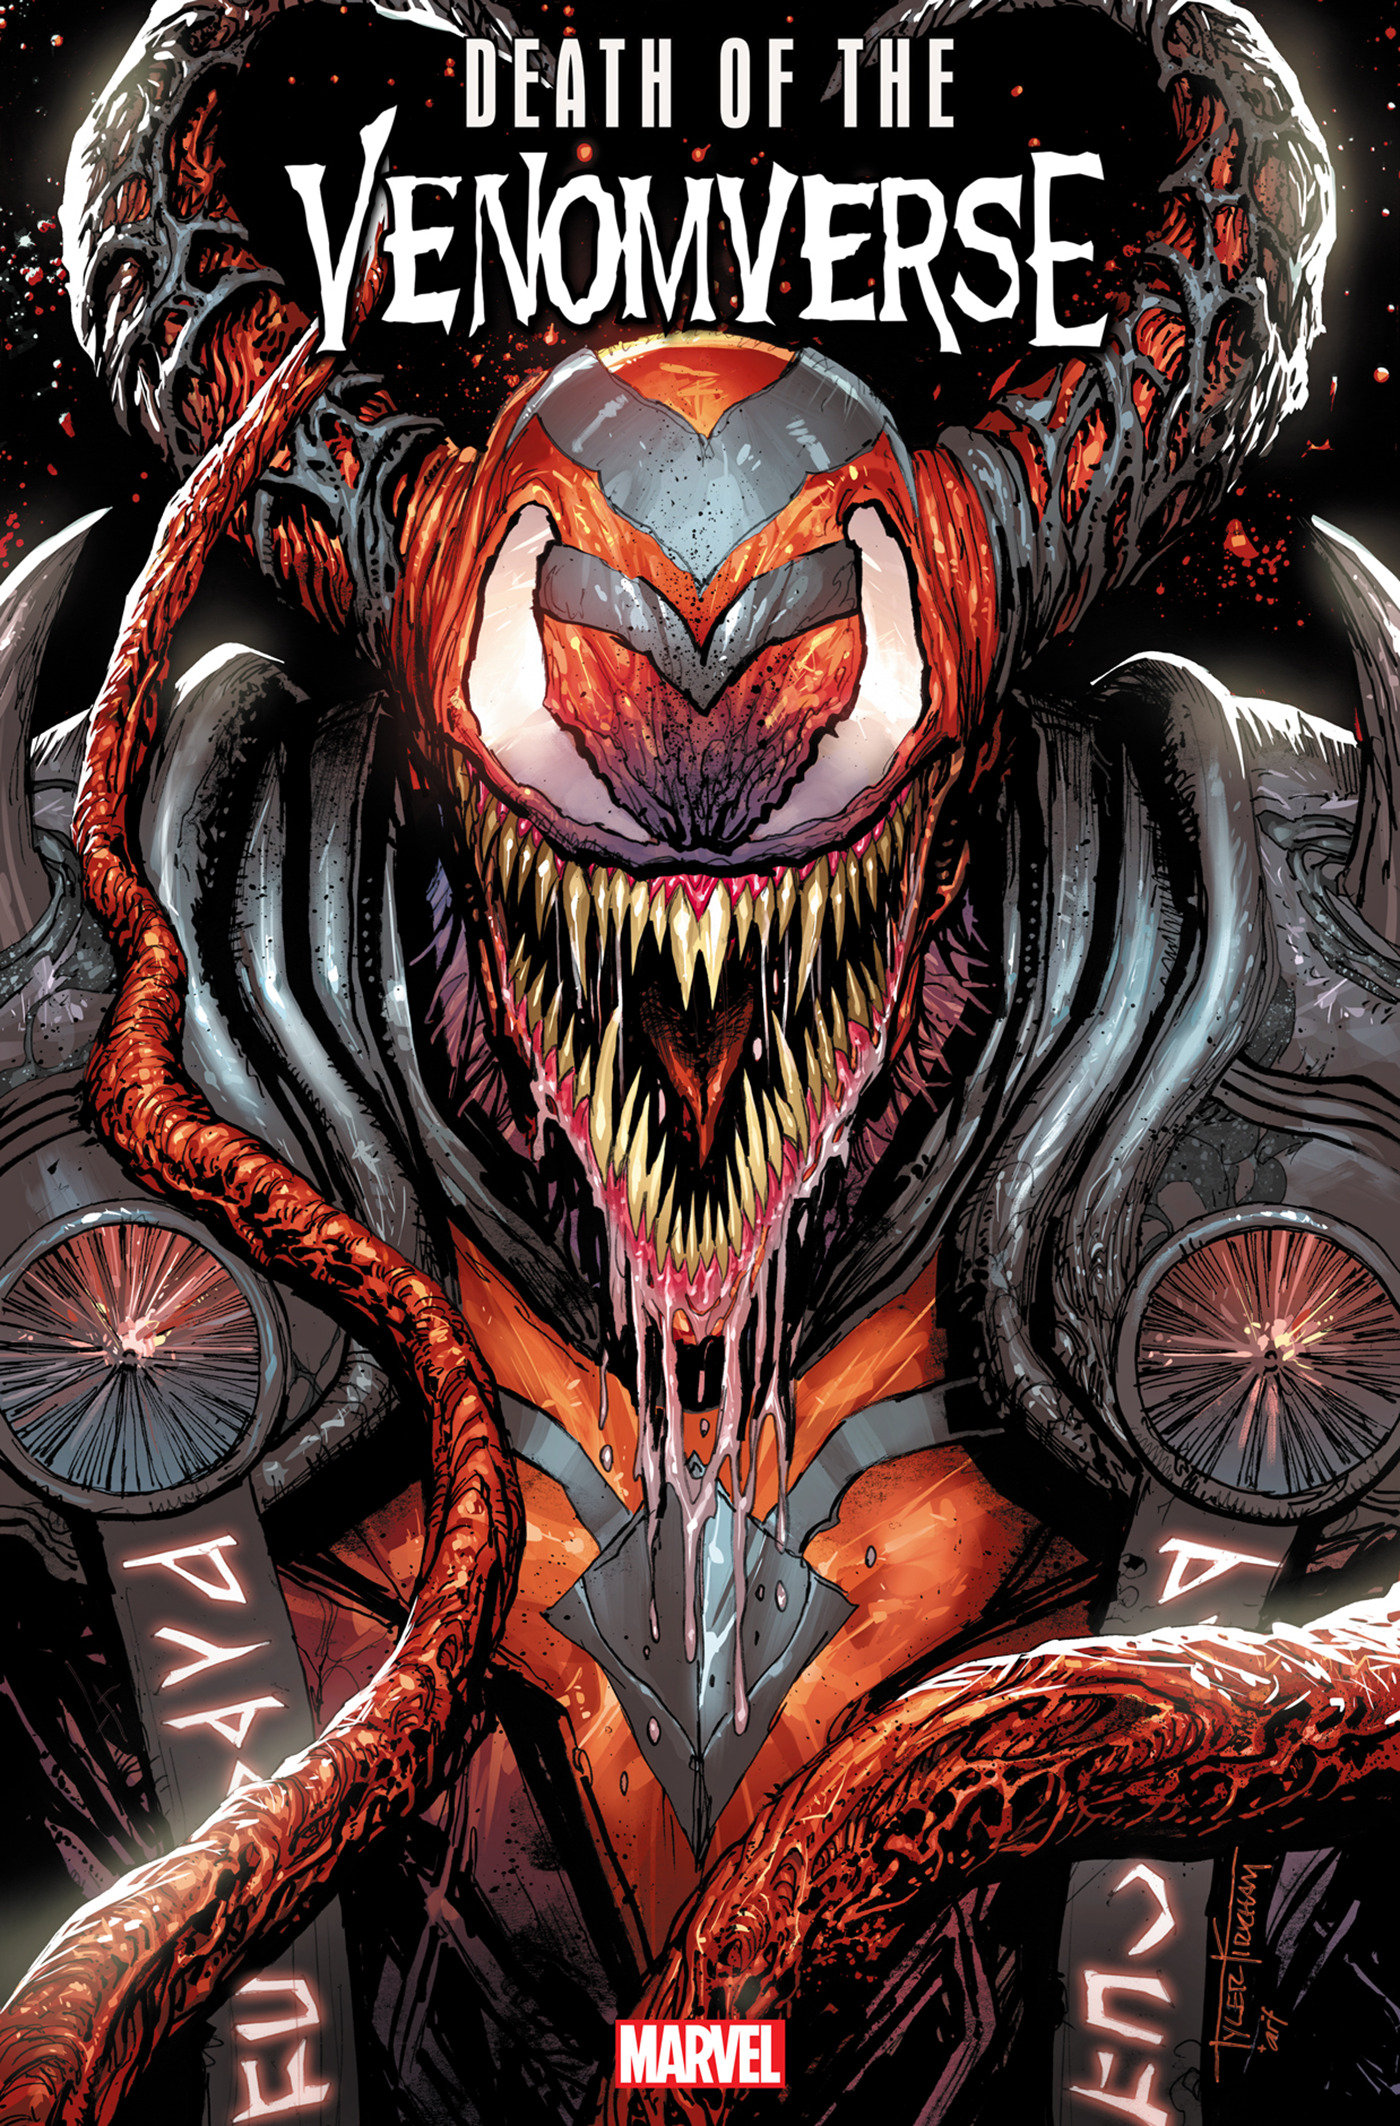 Death of the Venomverse #4 Tyler Kirkham 1 for 50 Incentive